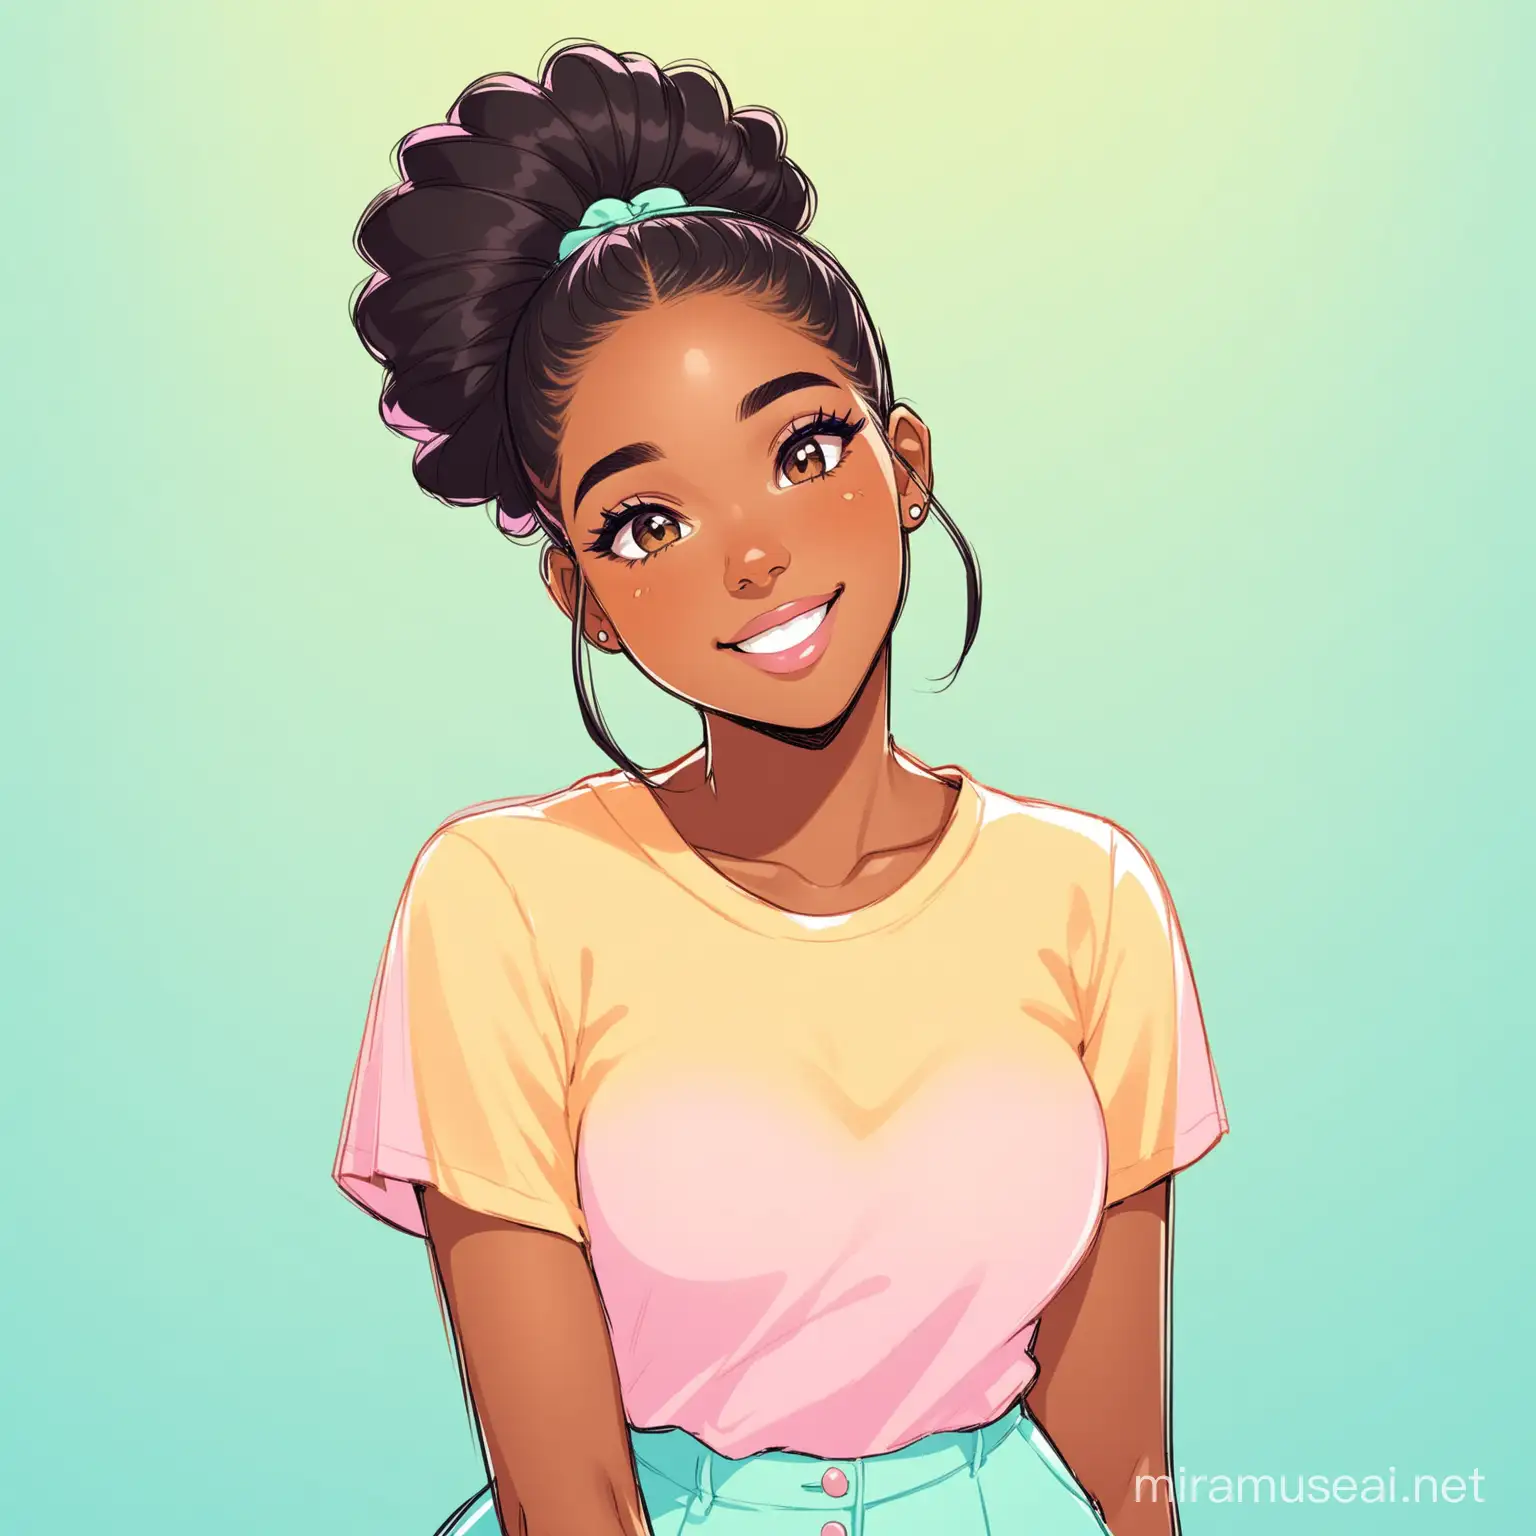 Smiling Young Black Woman Cartoon Portrait in Pastel Colors